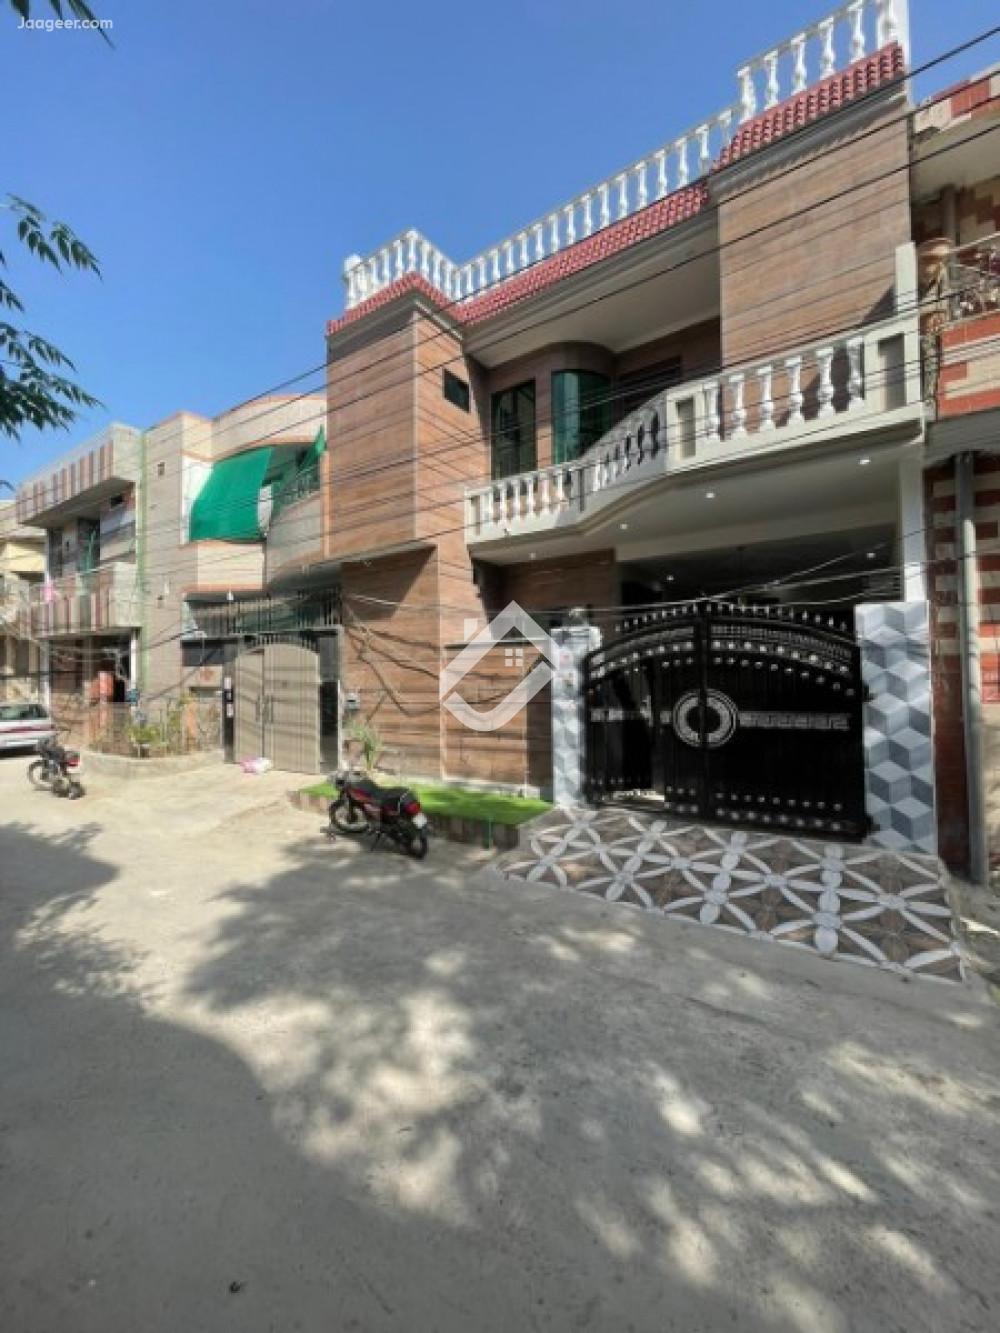 Main image 5 Marla House For Sale In Superior Town Faisalabad road 